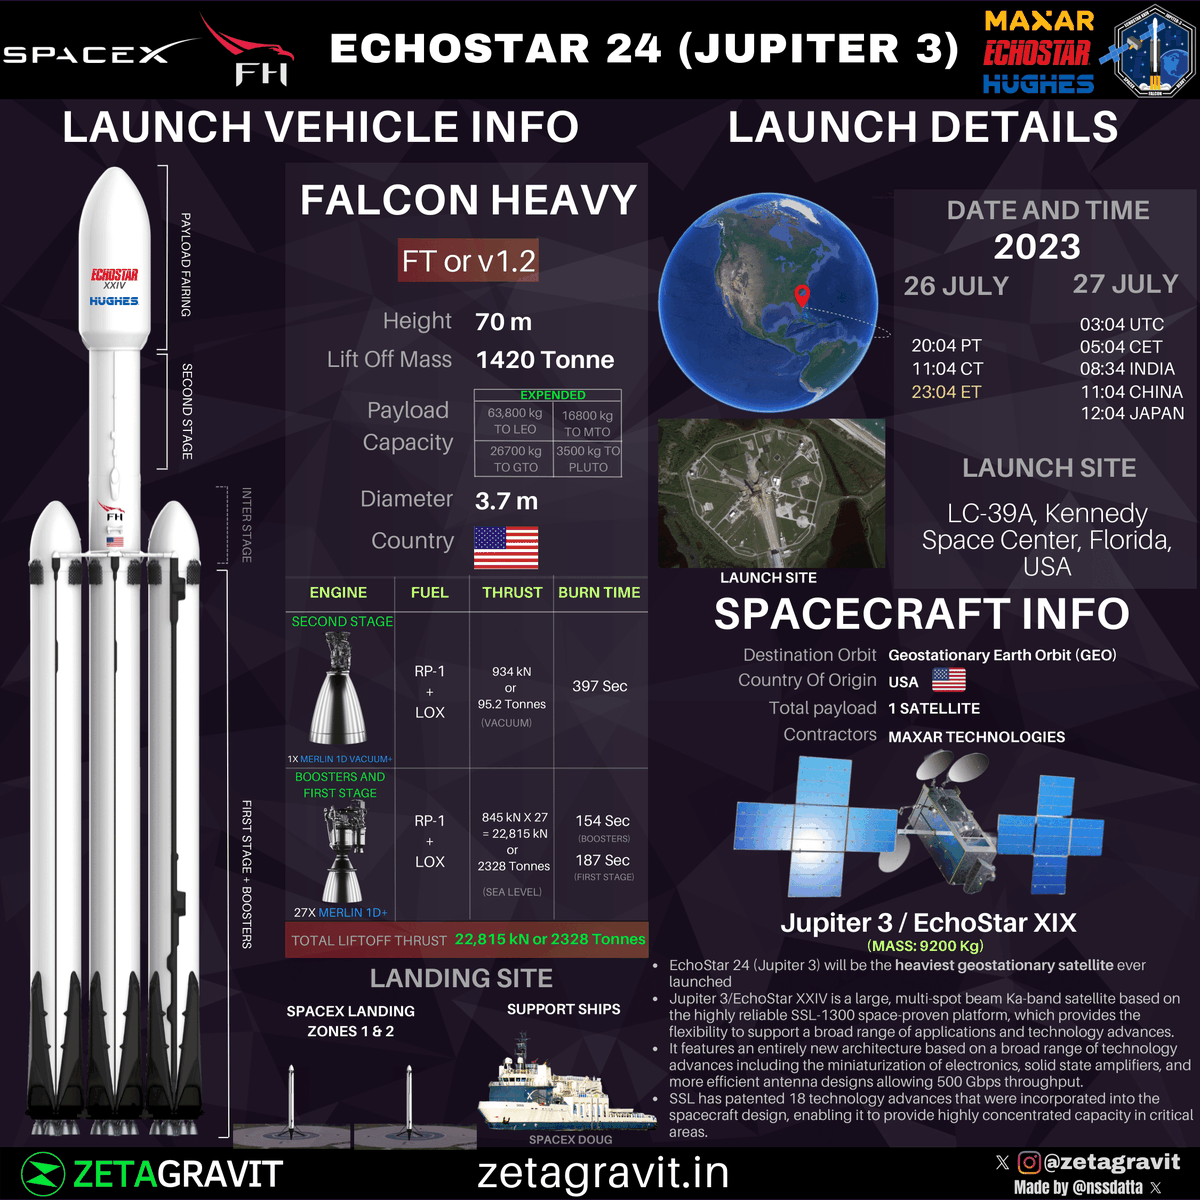 Launch Update 📢 from @SpaceX

#EchoStar24 / #Jupiter3-The largest #satellite ever built is Going to be Launched Onboard the #SpaceX's Falcon Heavy

The launch is on July-27 03:04 UTC / 08:34 IST from #LC39A, Kennedy Space Center, #Florida, USA

Follow @zetagravit 

#FalconHeavy